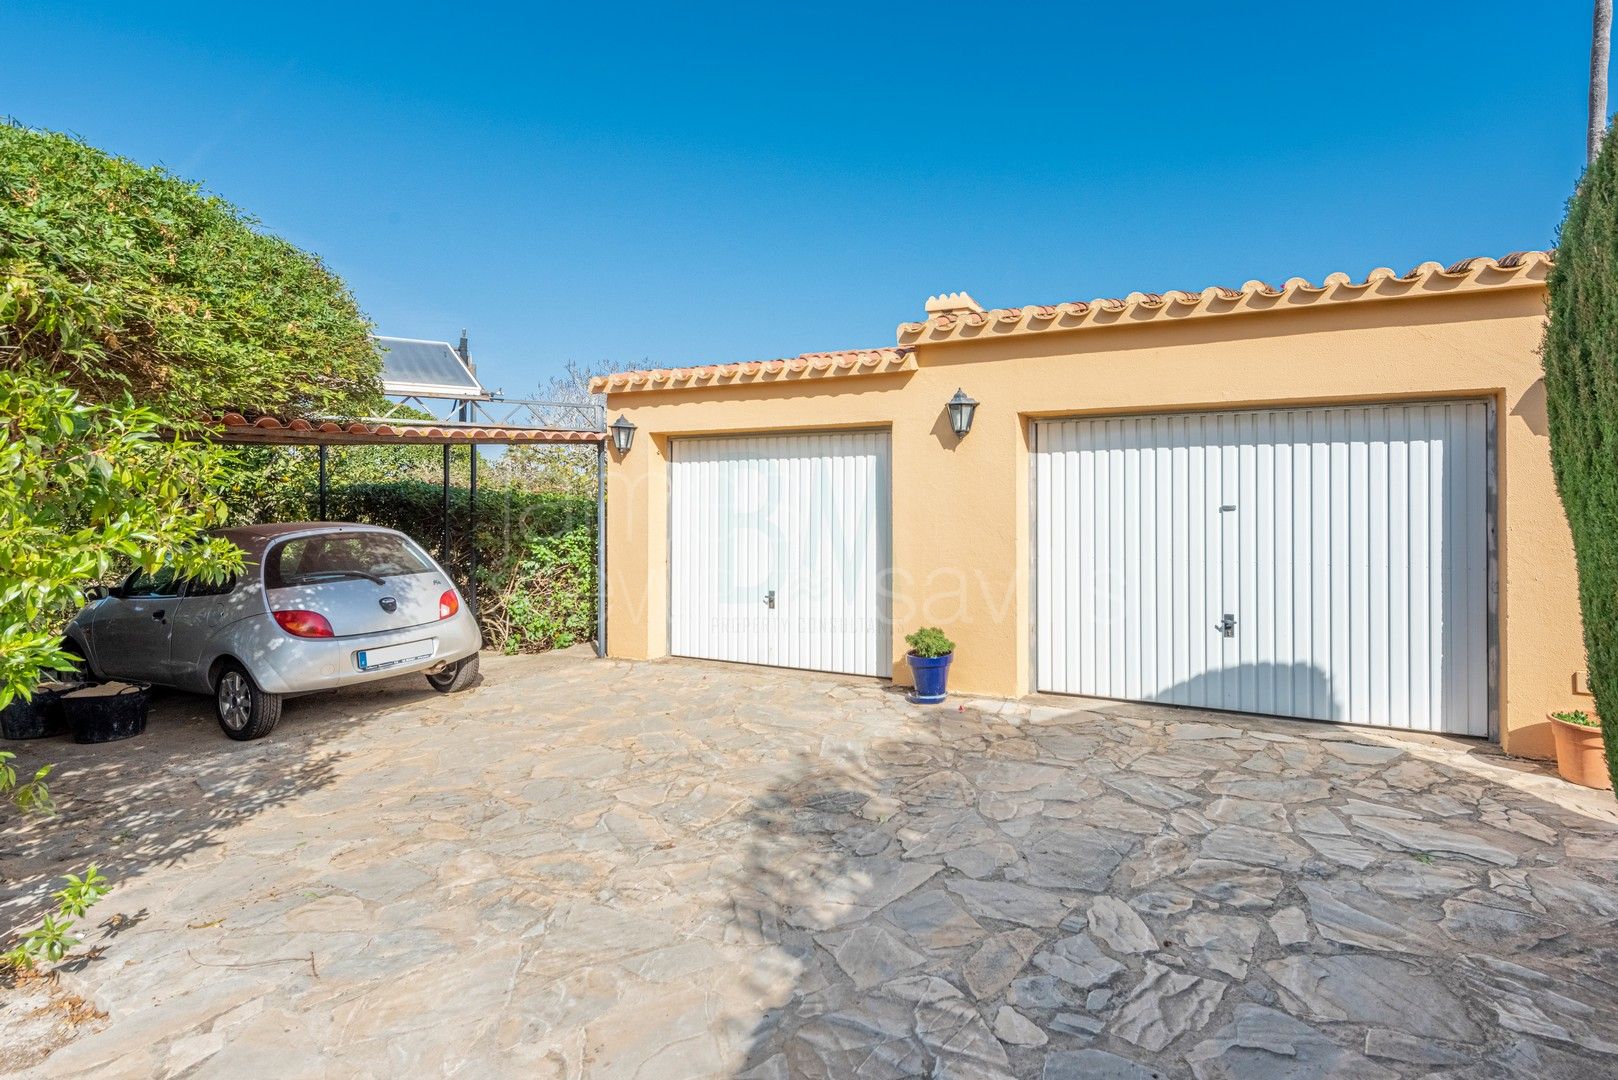 Lovely single storey villa on a double plot of 4193m2 with views to the Estepona mountain range